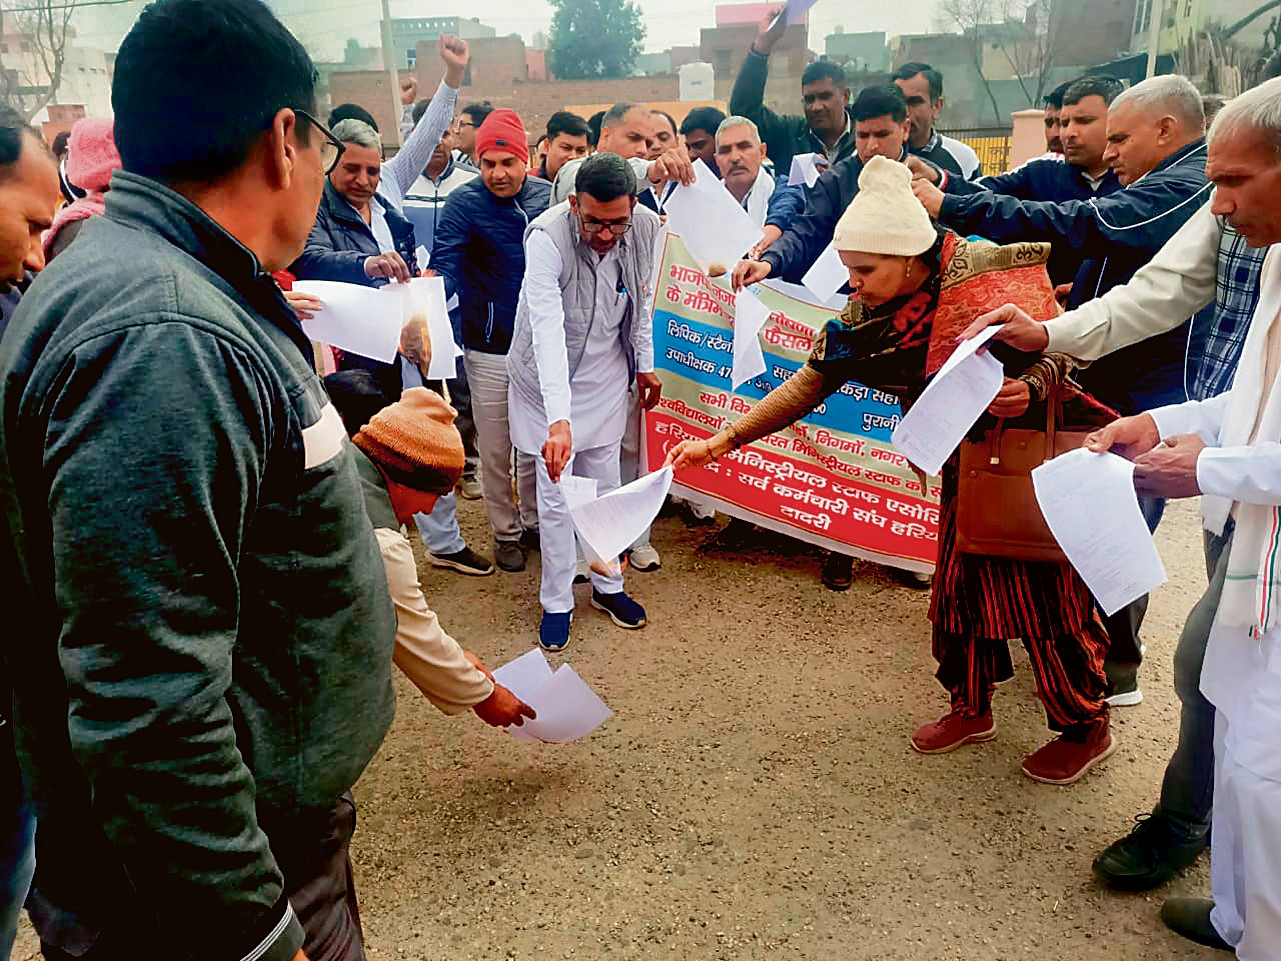 Employees’ organizations came out in support of salary hike of clerks, expressed anger by burning copies – Presswire18